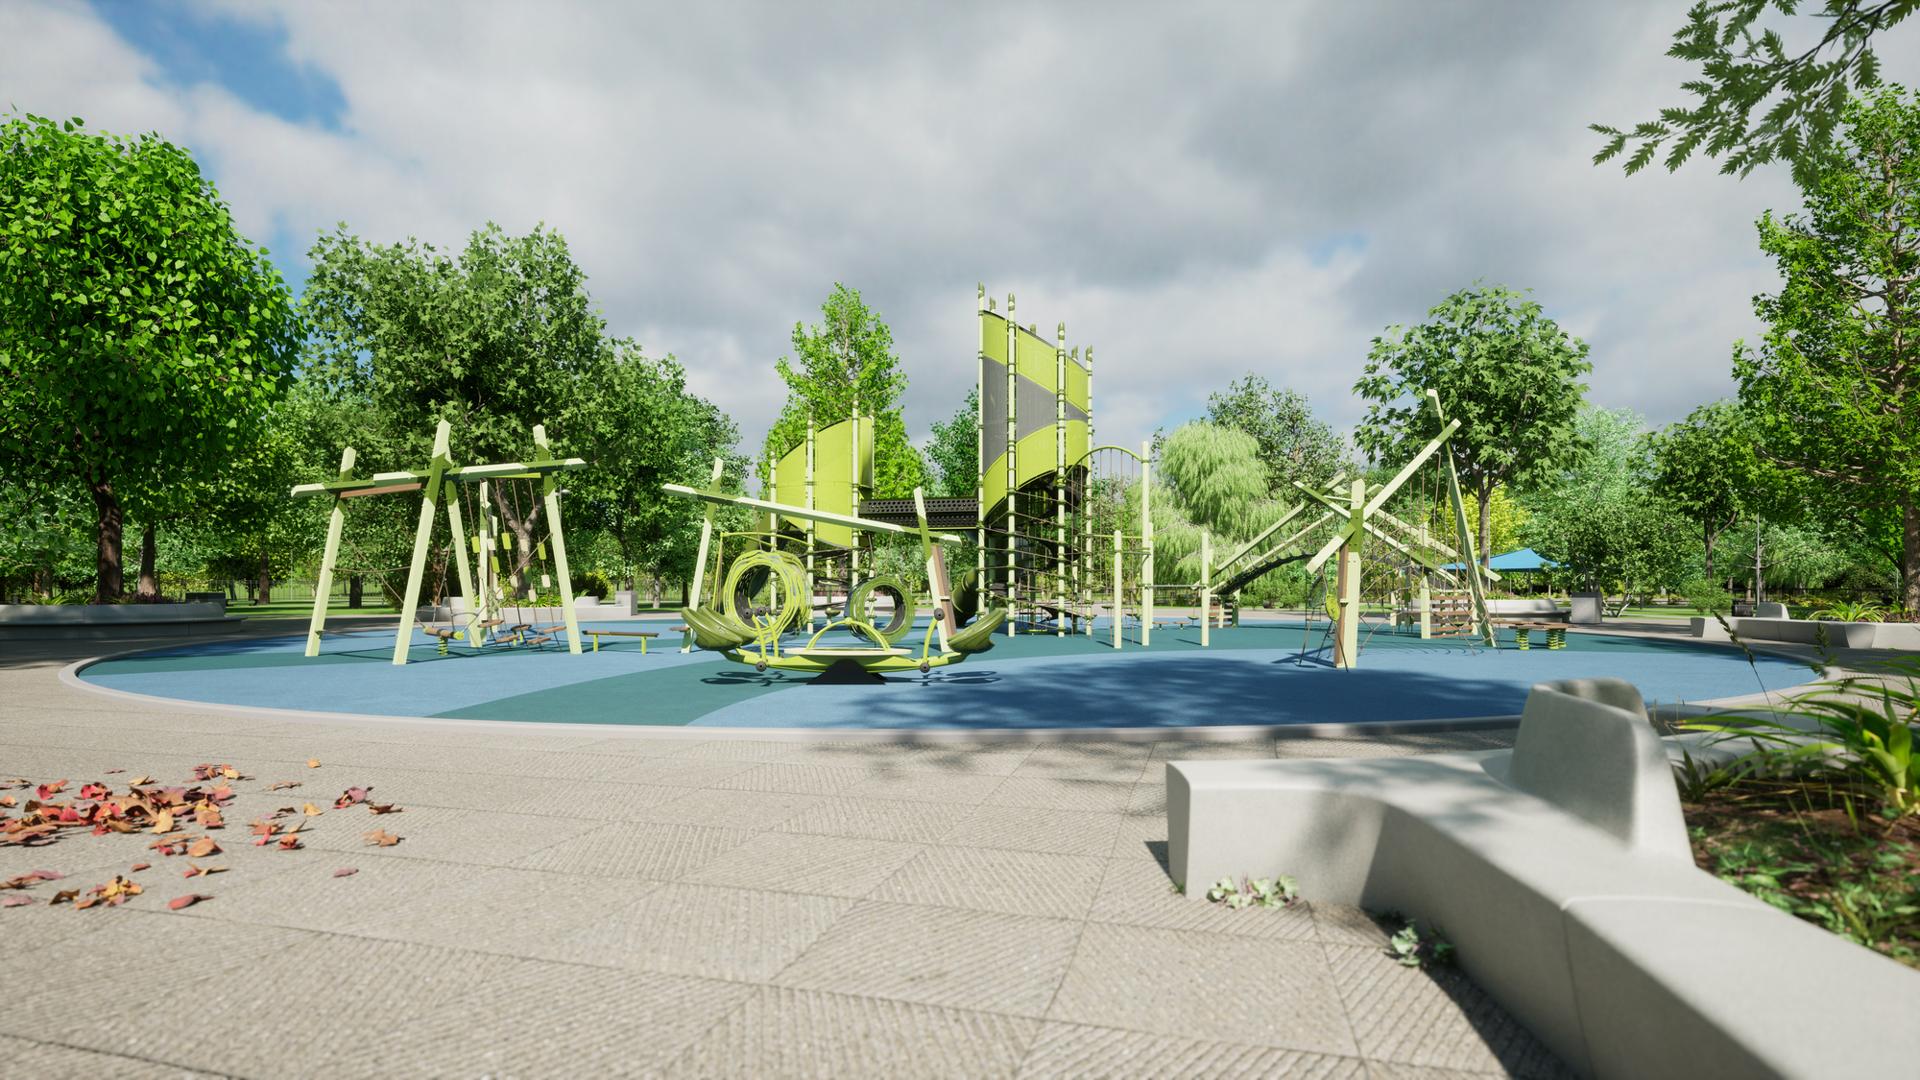 Animated rendering of a park playground surrounded by lush green trees with modern designed play structures colored in varying colors of green.